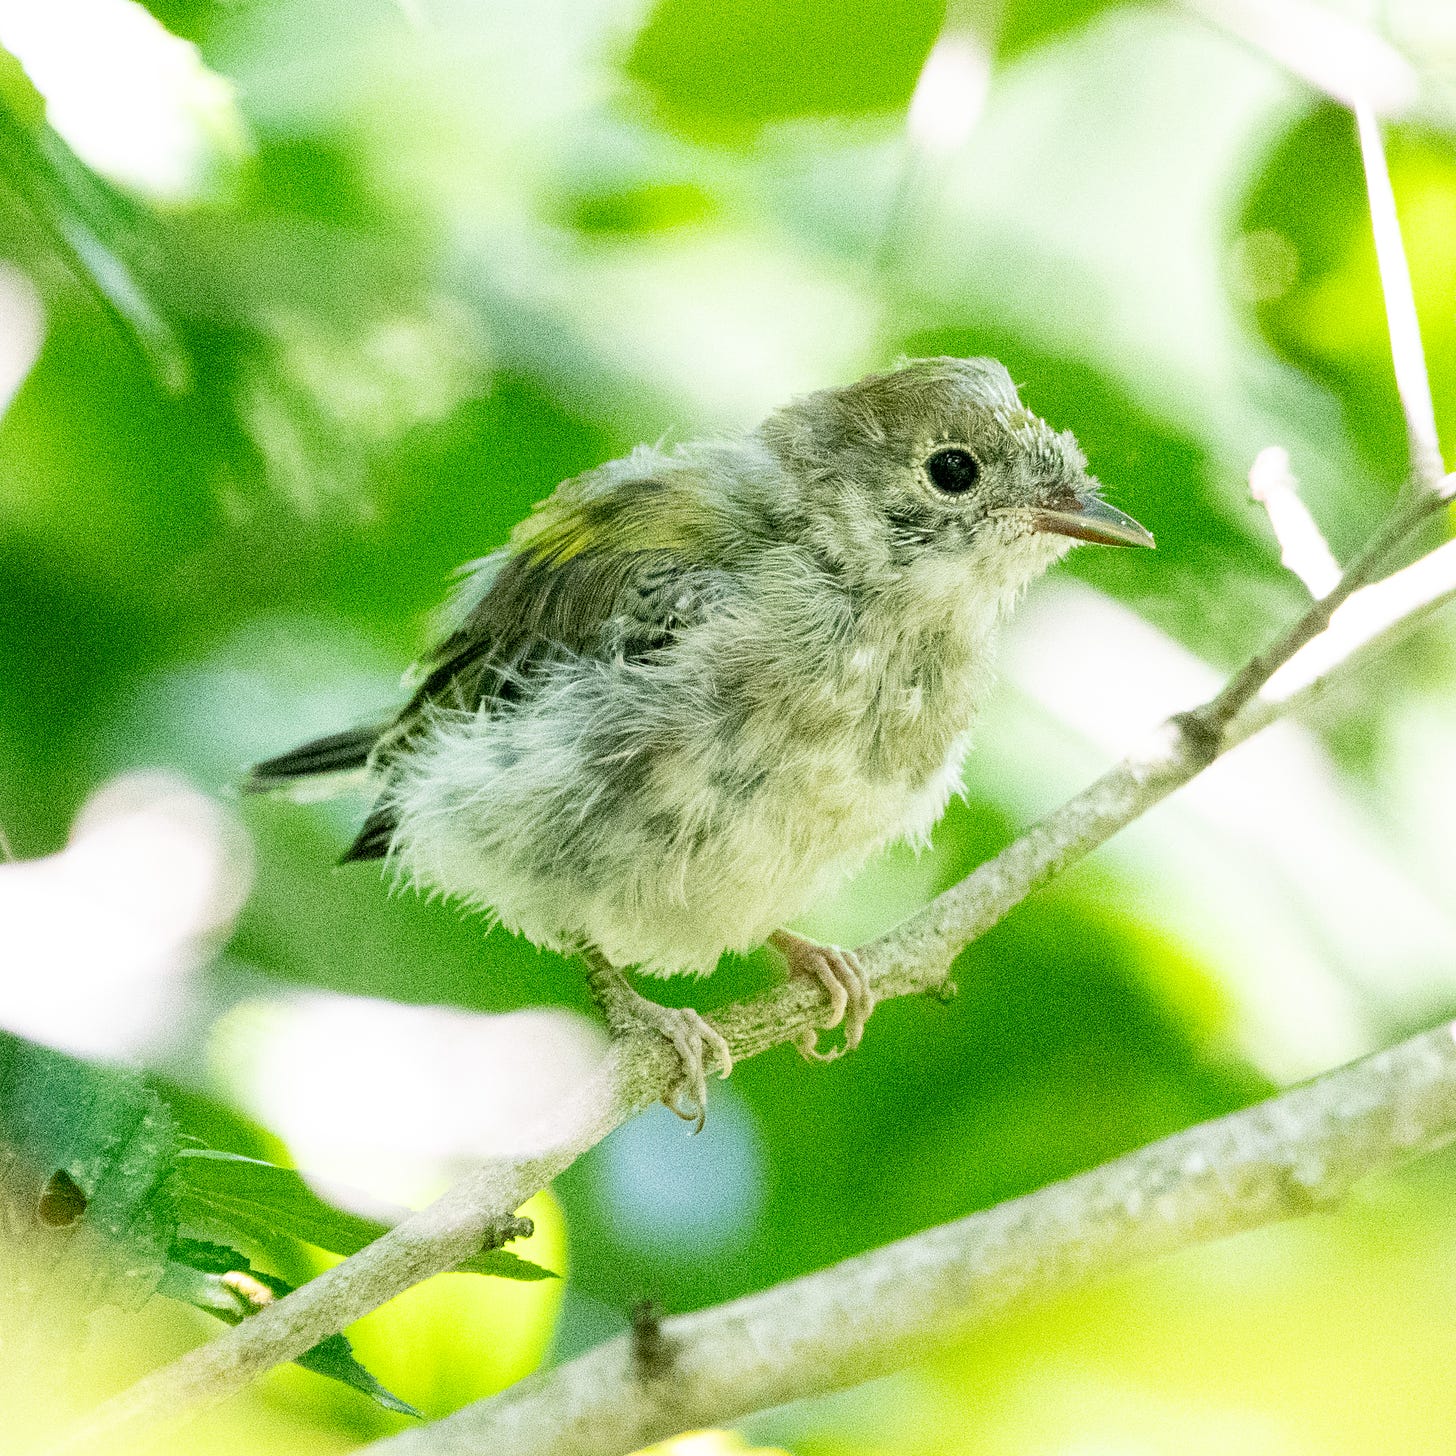 A chestnut-sided warbler fledgling, looking young, vague, and unhappy